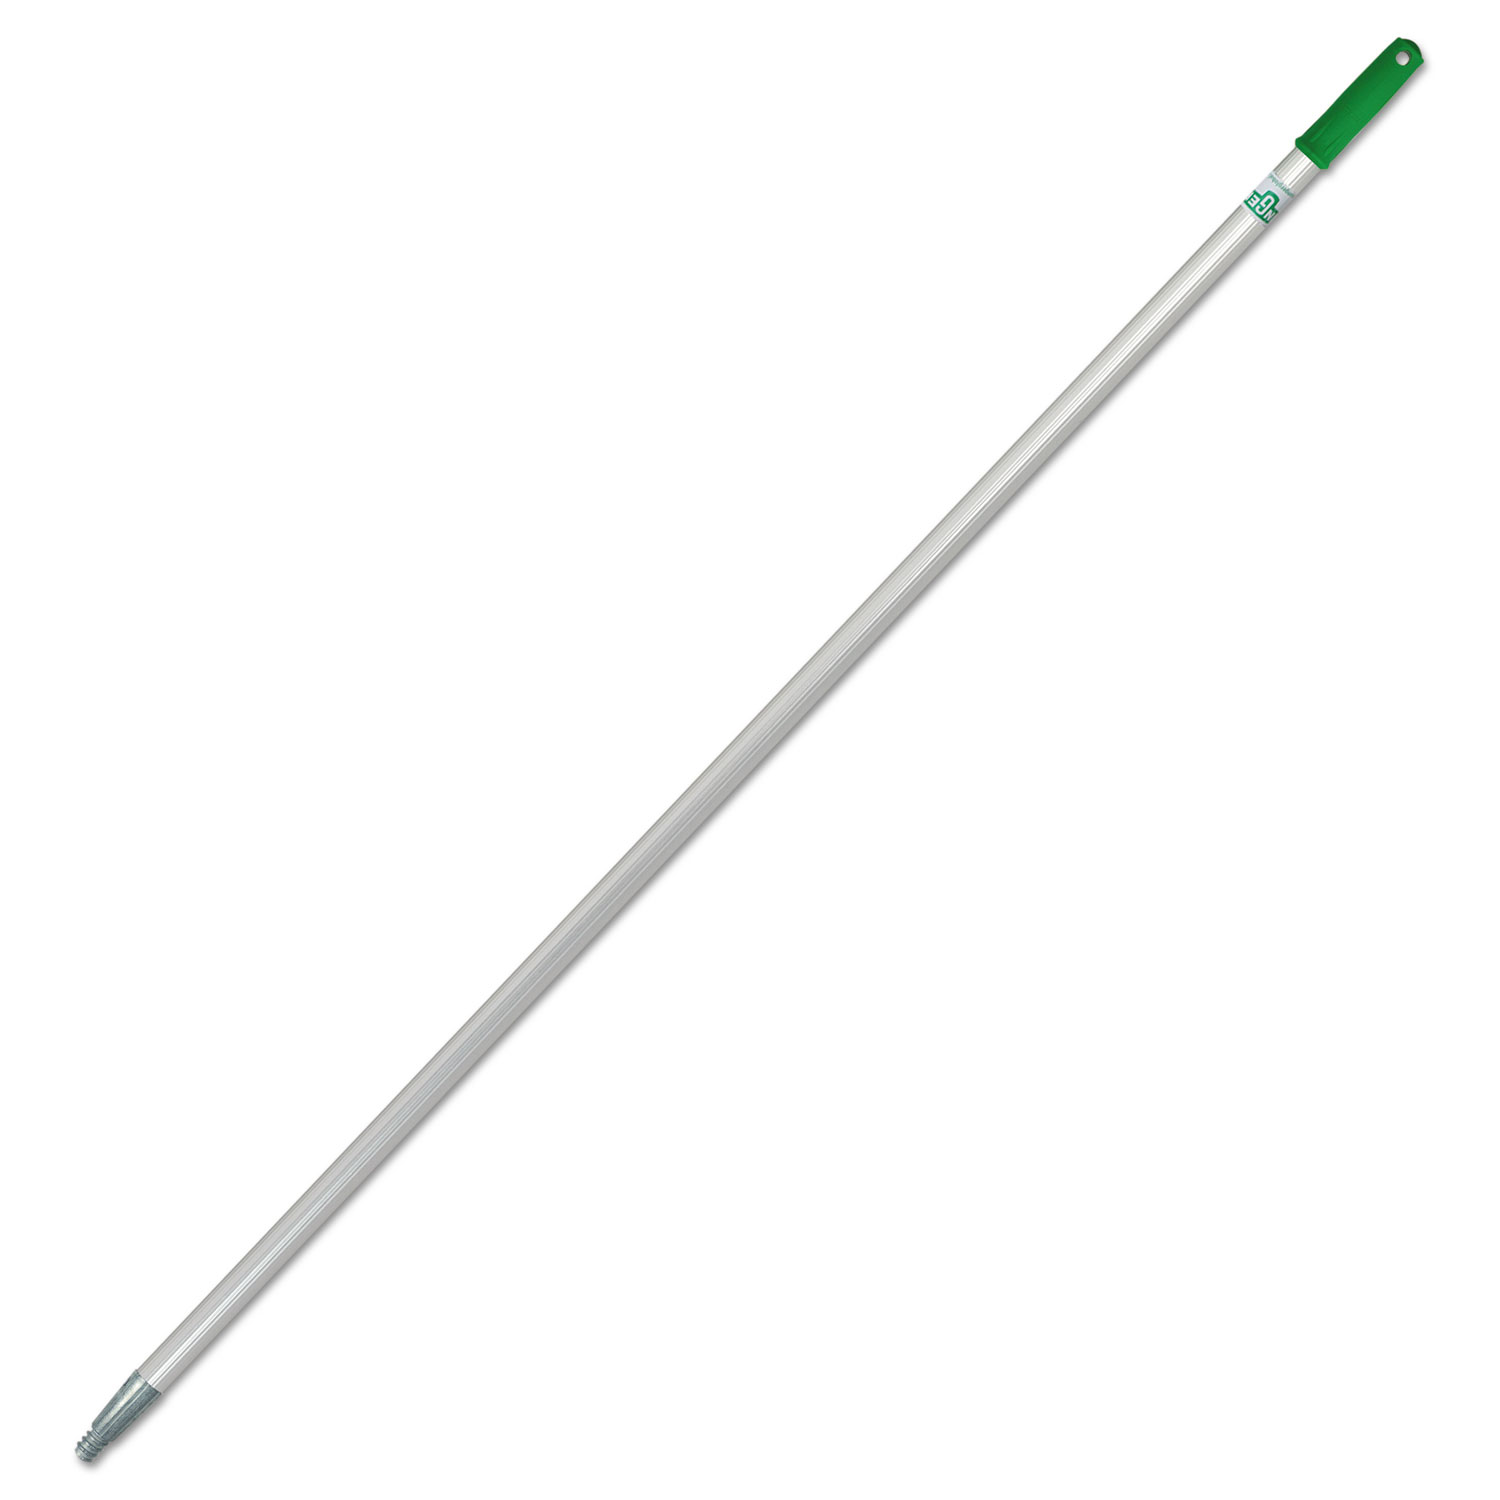 Pro Aluminum Handle for Floor Squeegees, 3 Degree with Acme, 61"